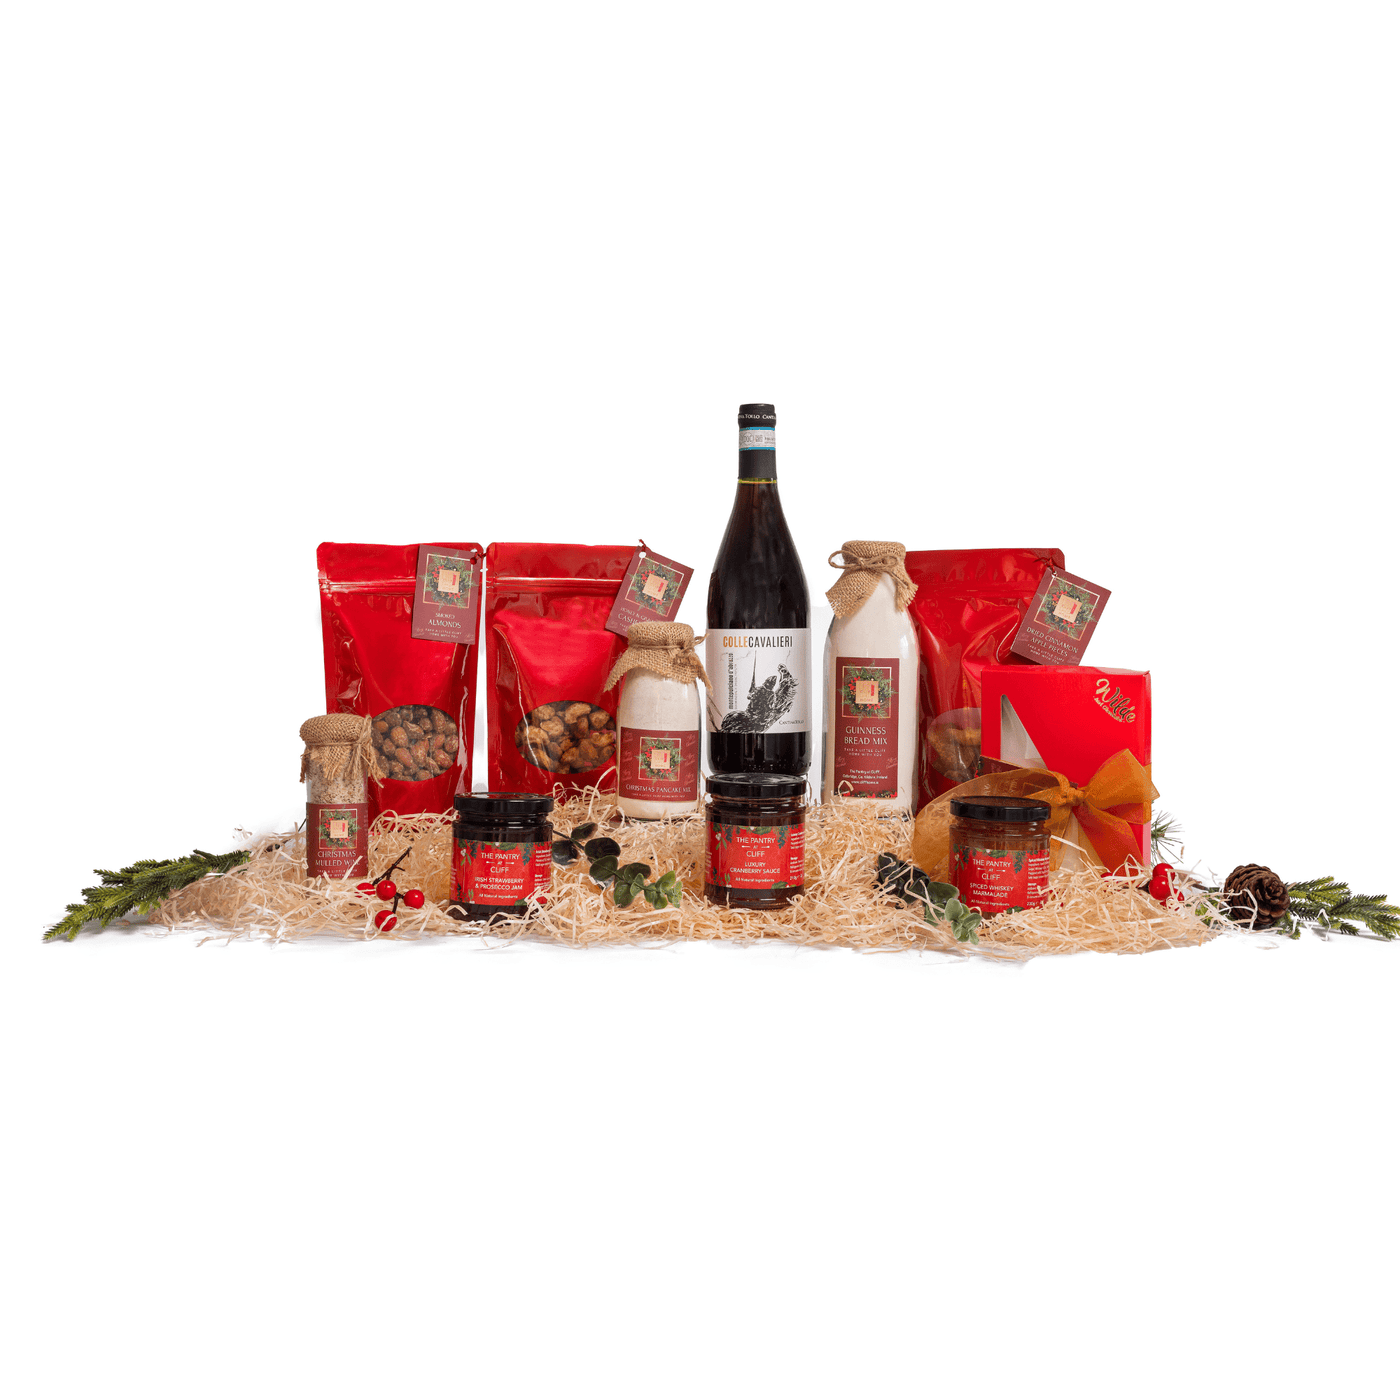 CLIFF Home Christmas Signature CLIFF Gift Box